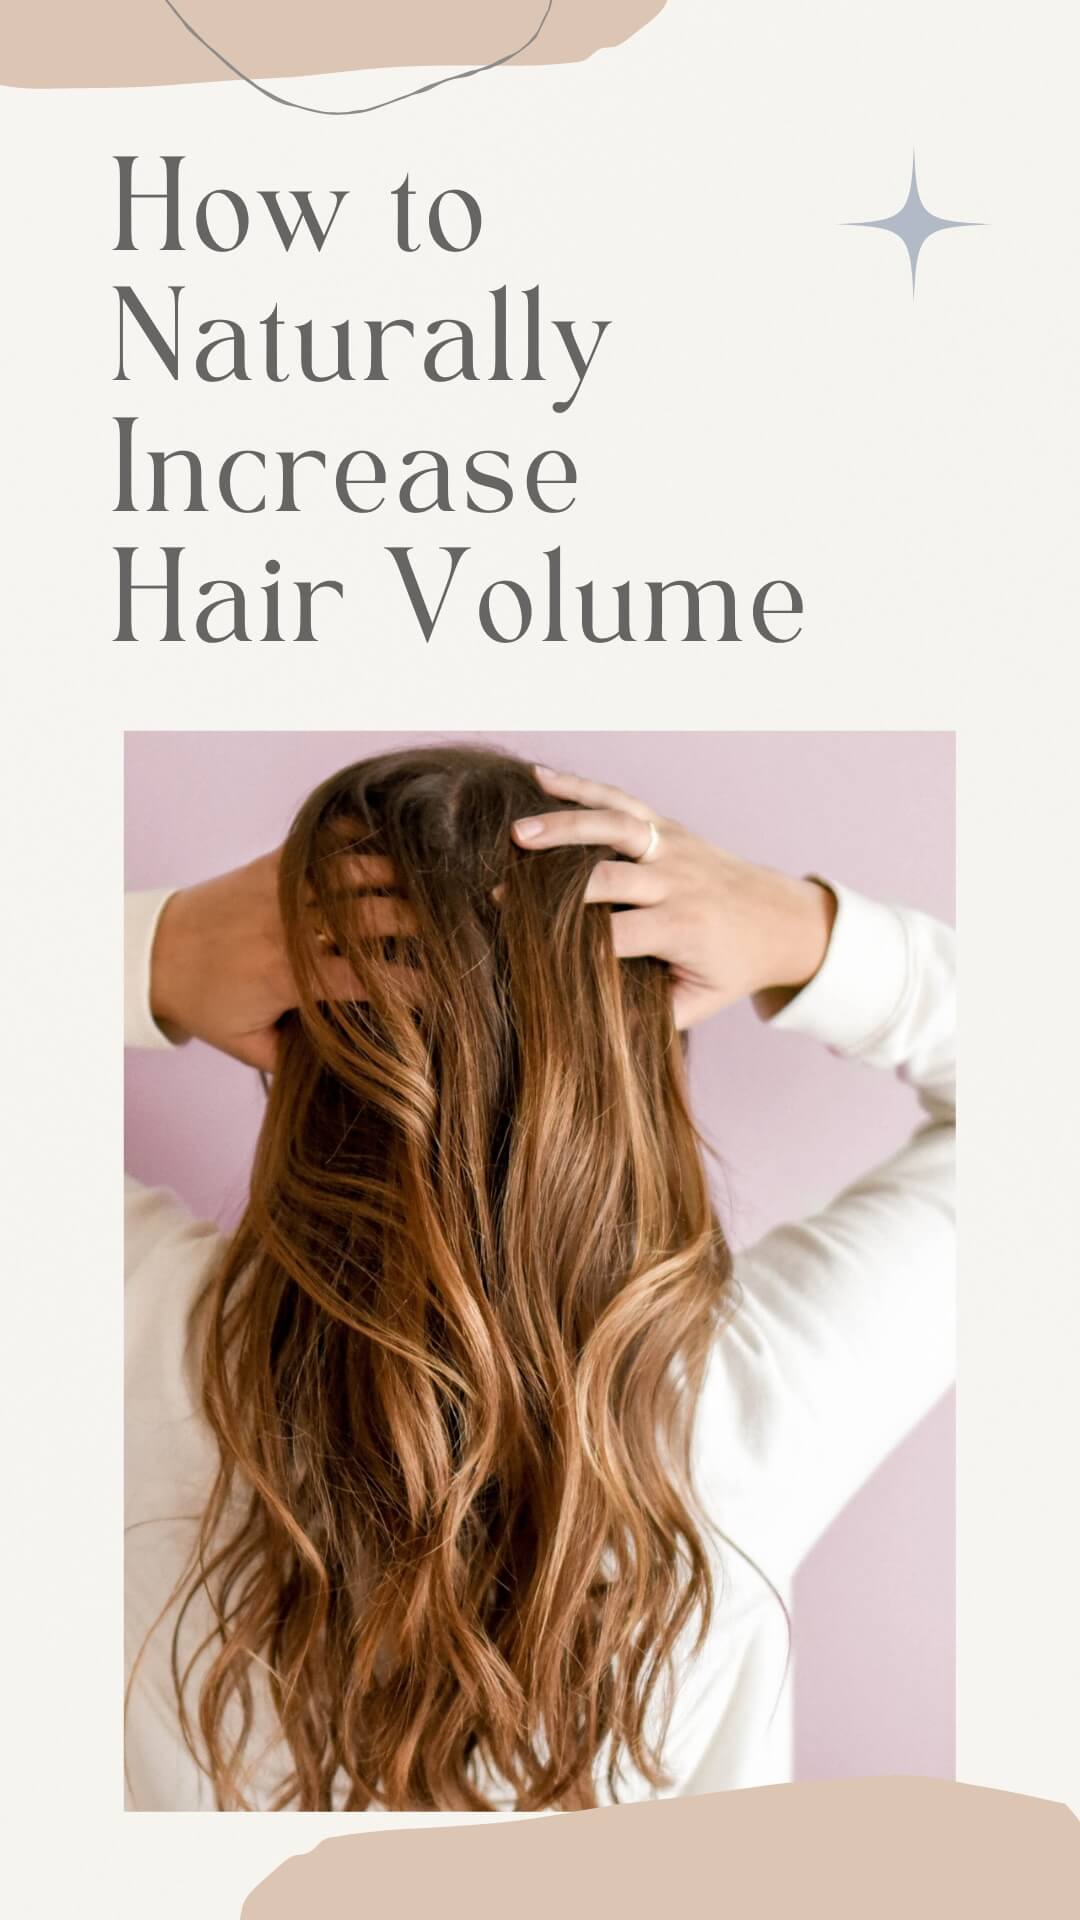 How to Naturally Increase Hair Volume